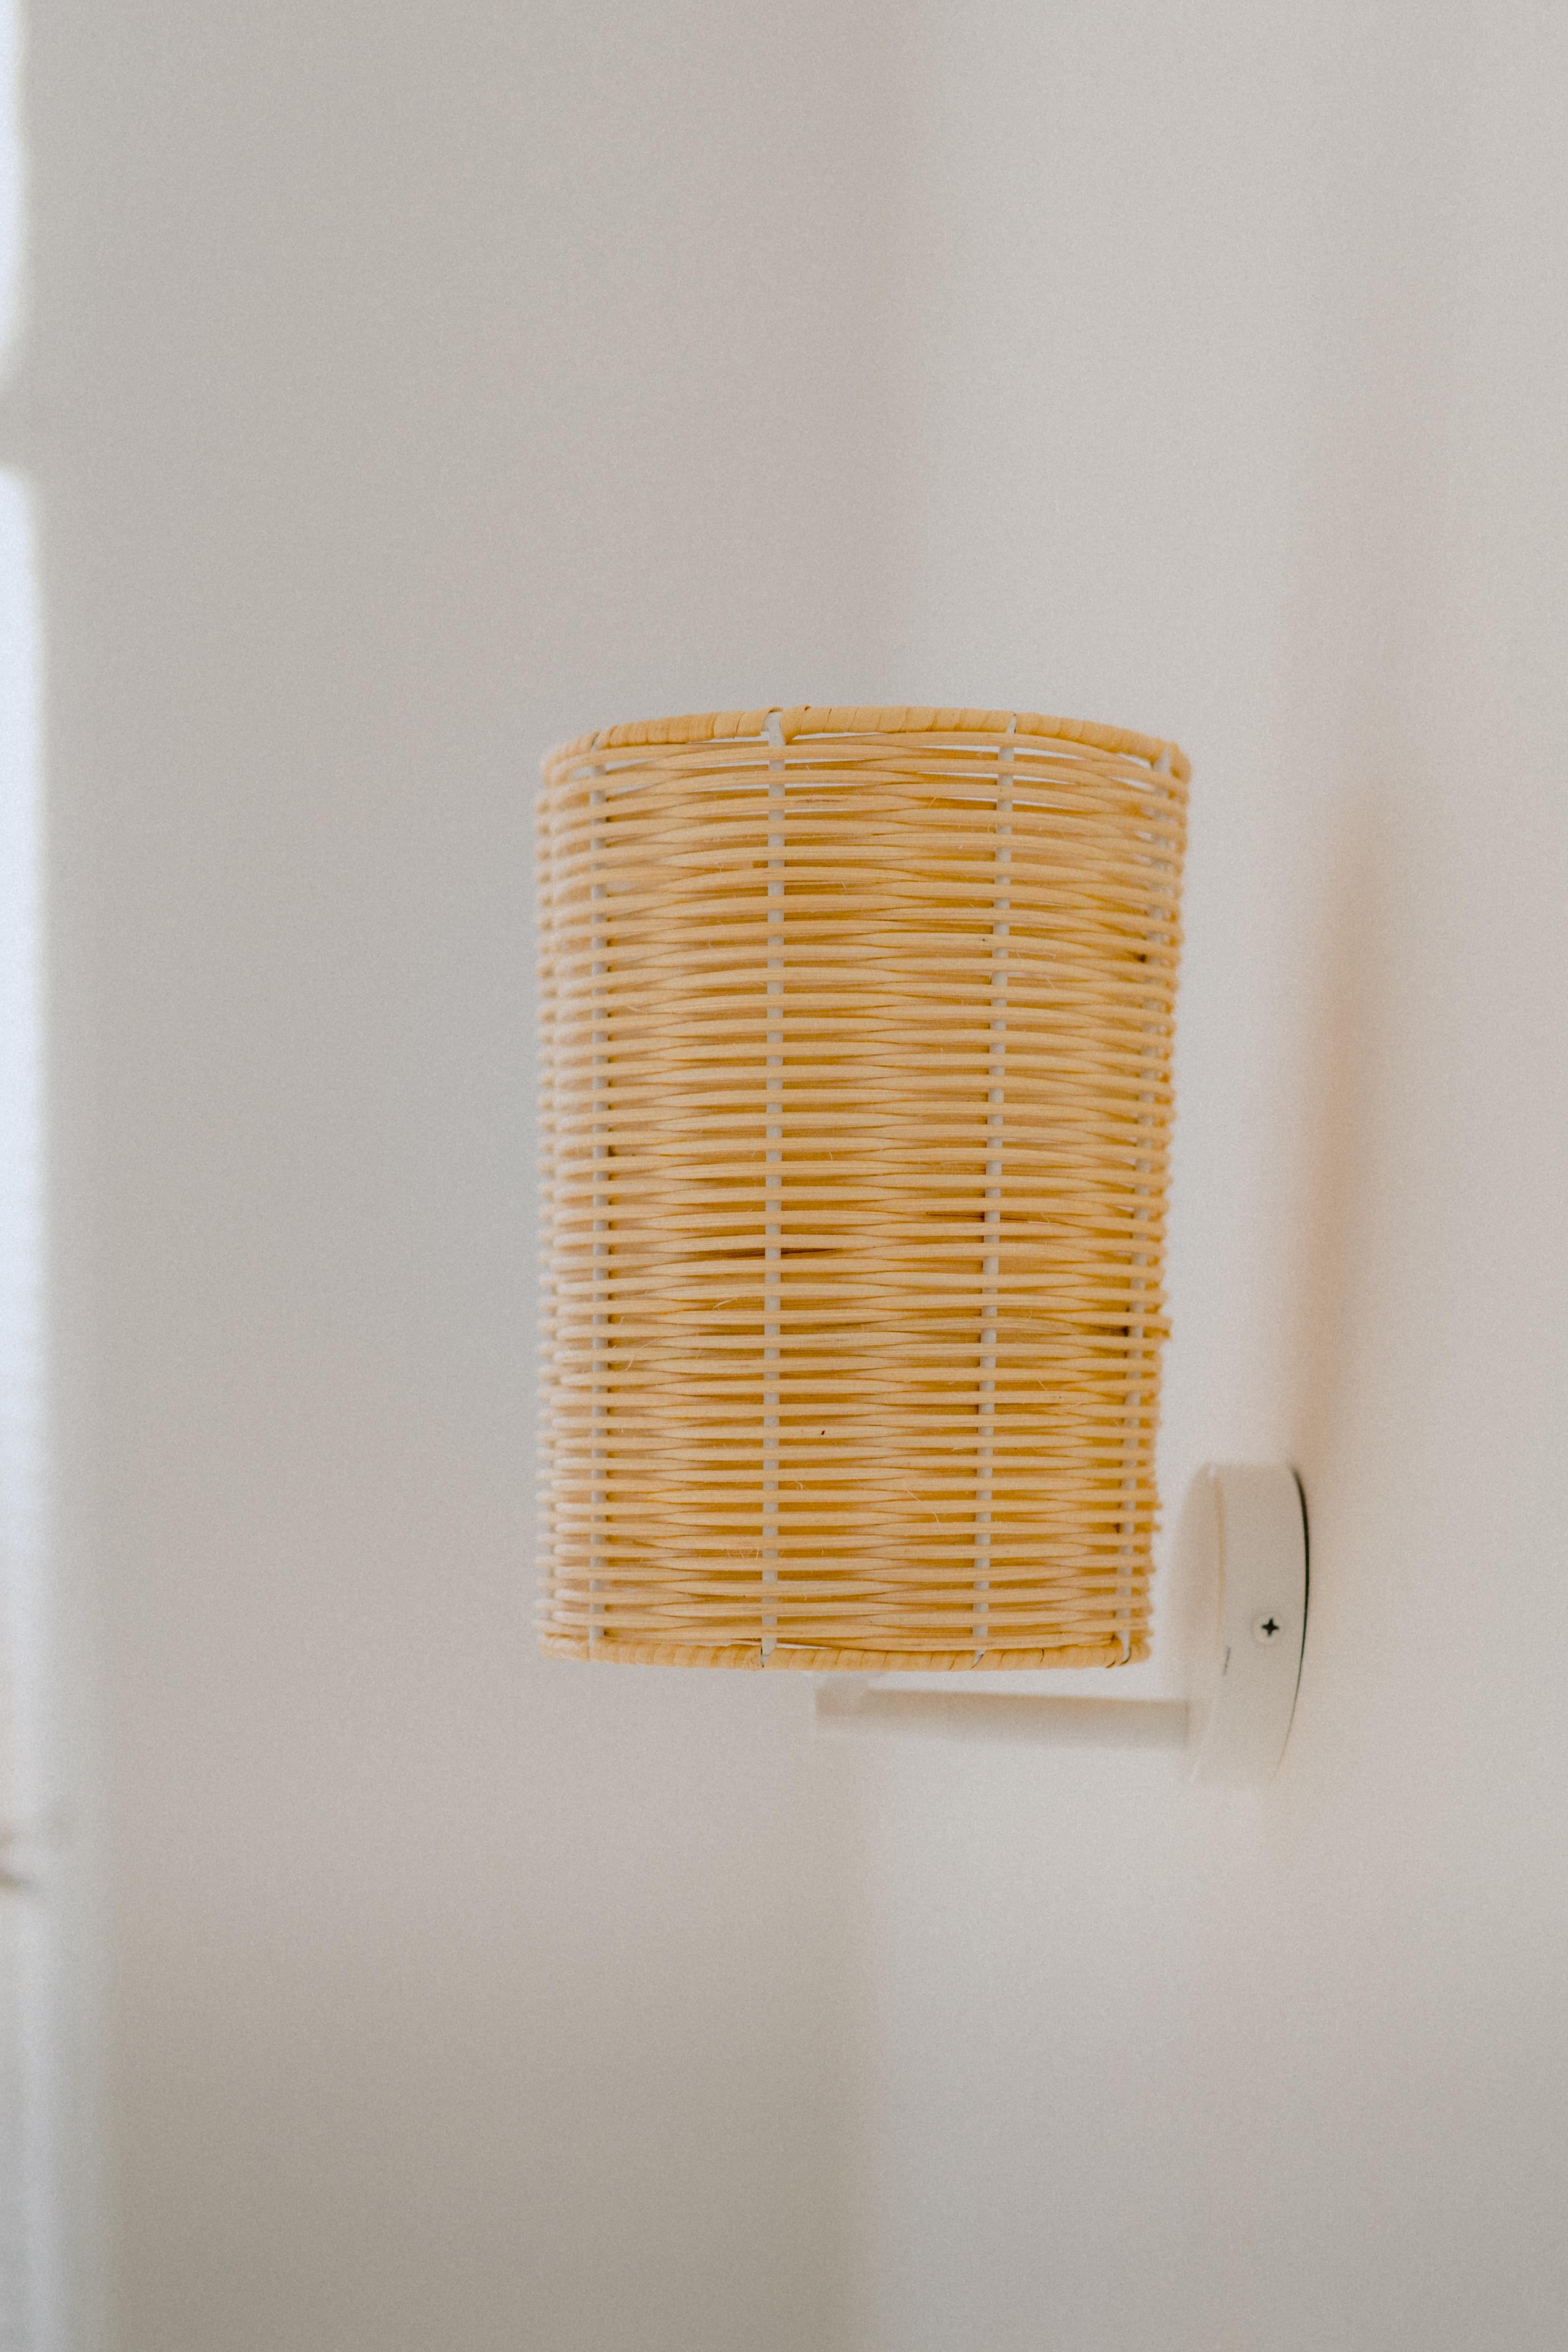 Spanish Contemporary, Handmade, Wall Lamp, Rattan Cylinder, by Mediterranean Objects -A For Sale